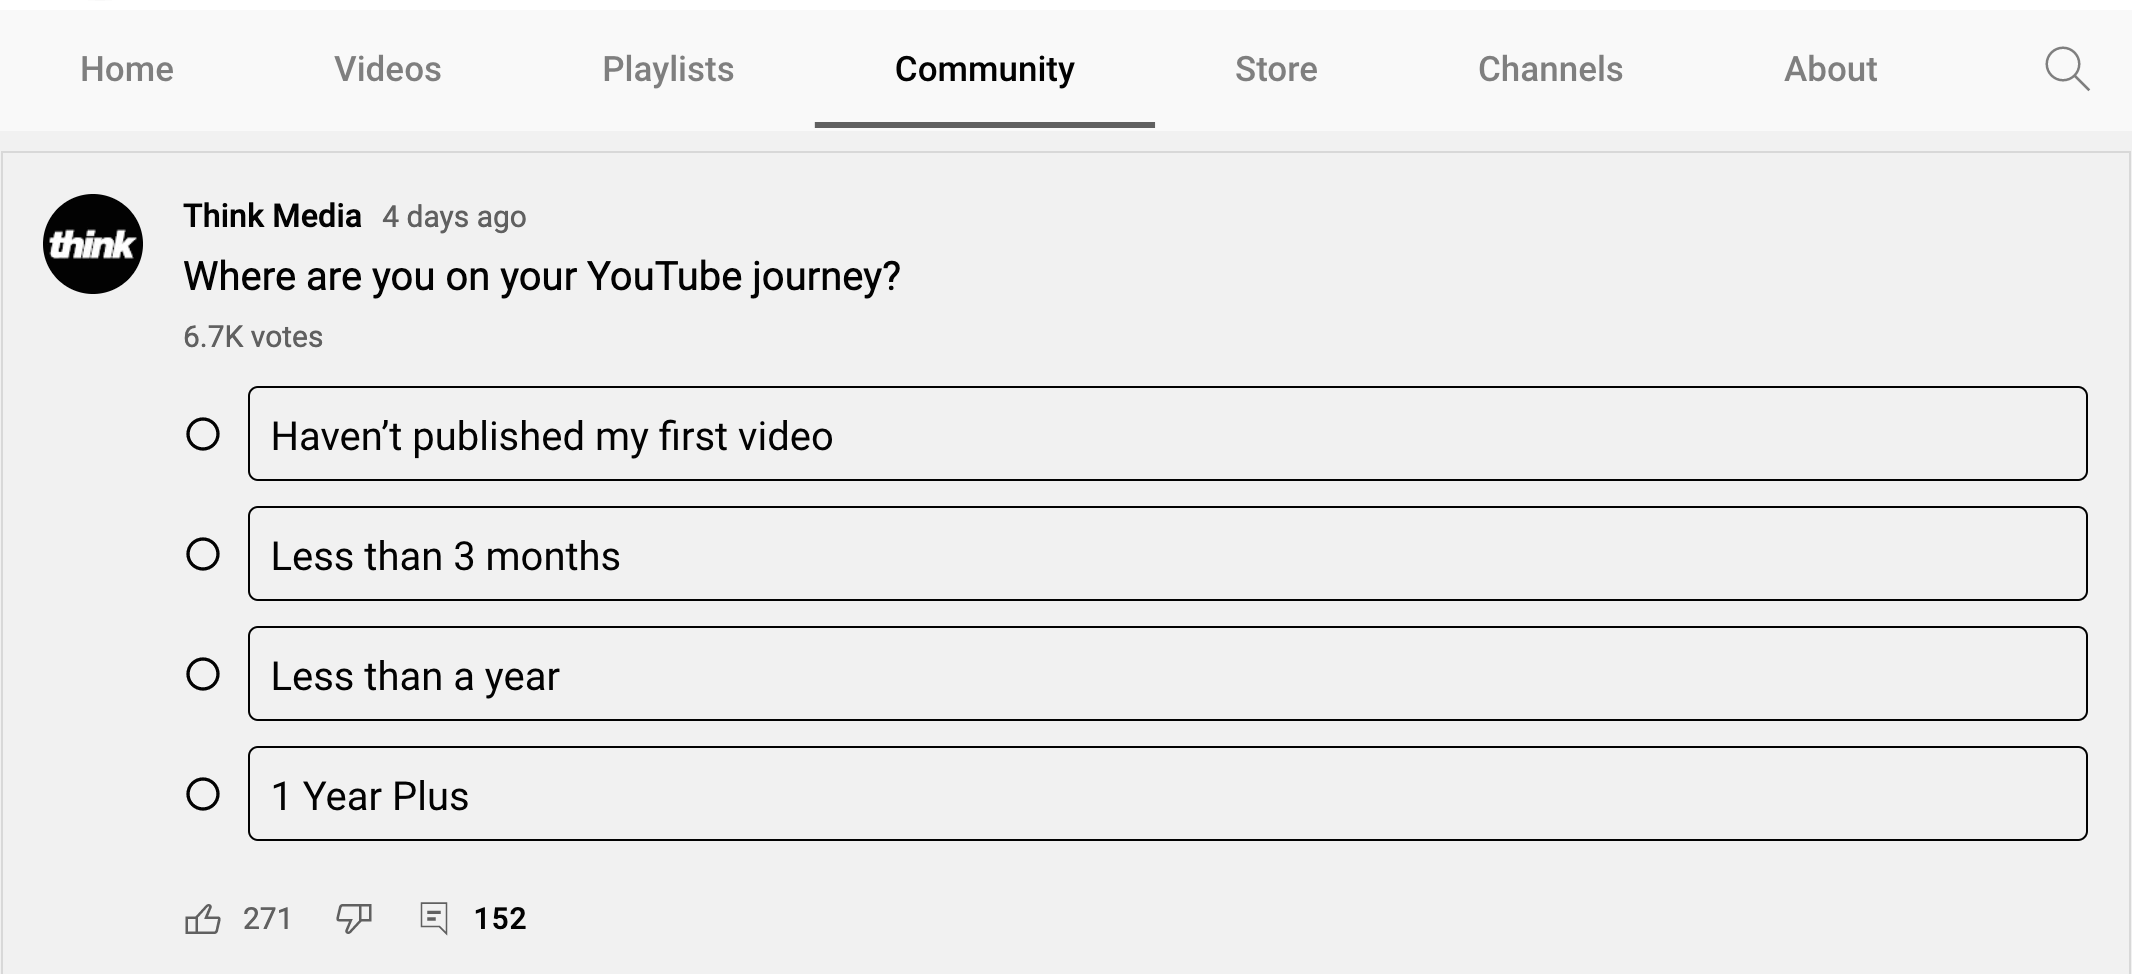 image of poll on Community tab of YouTube channel